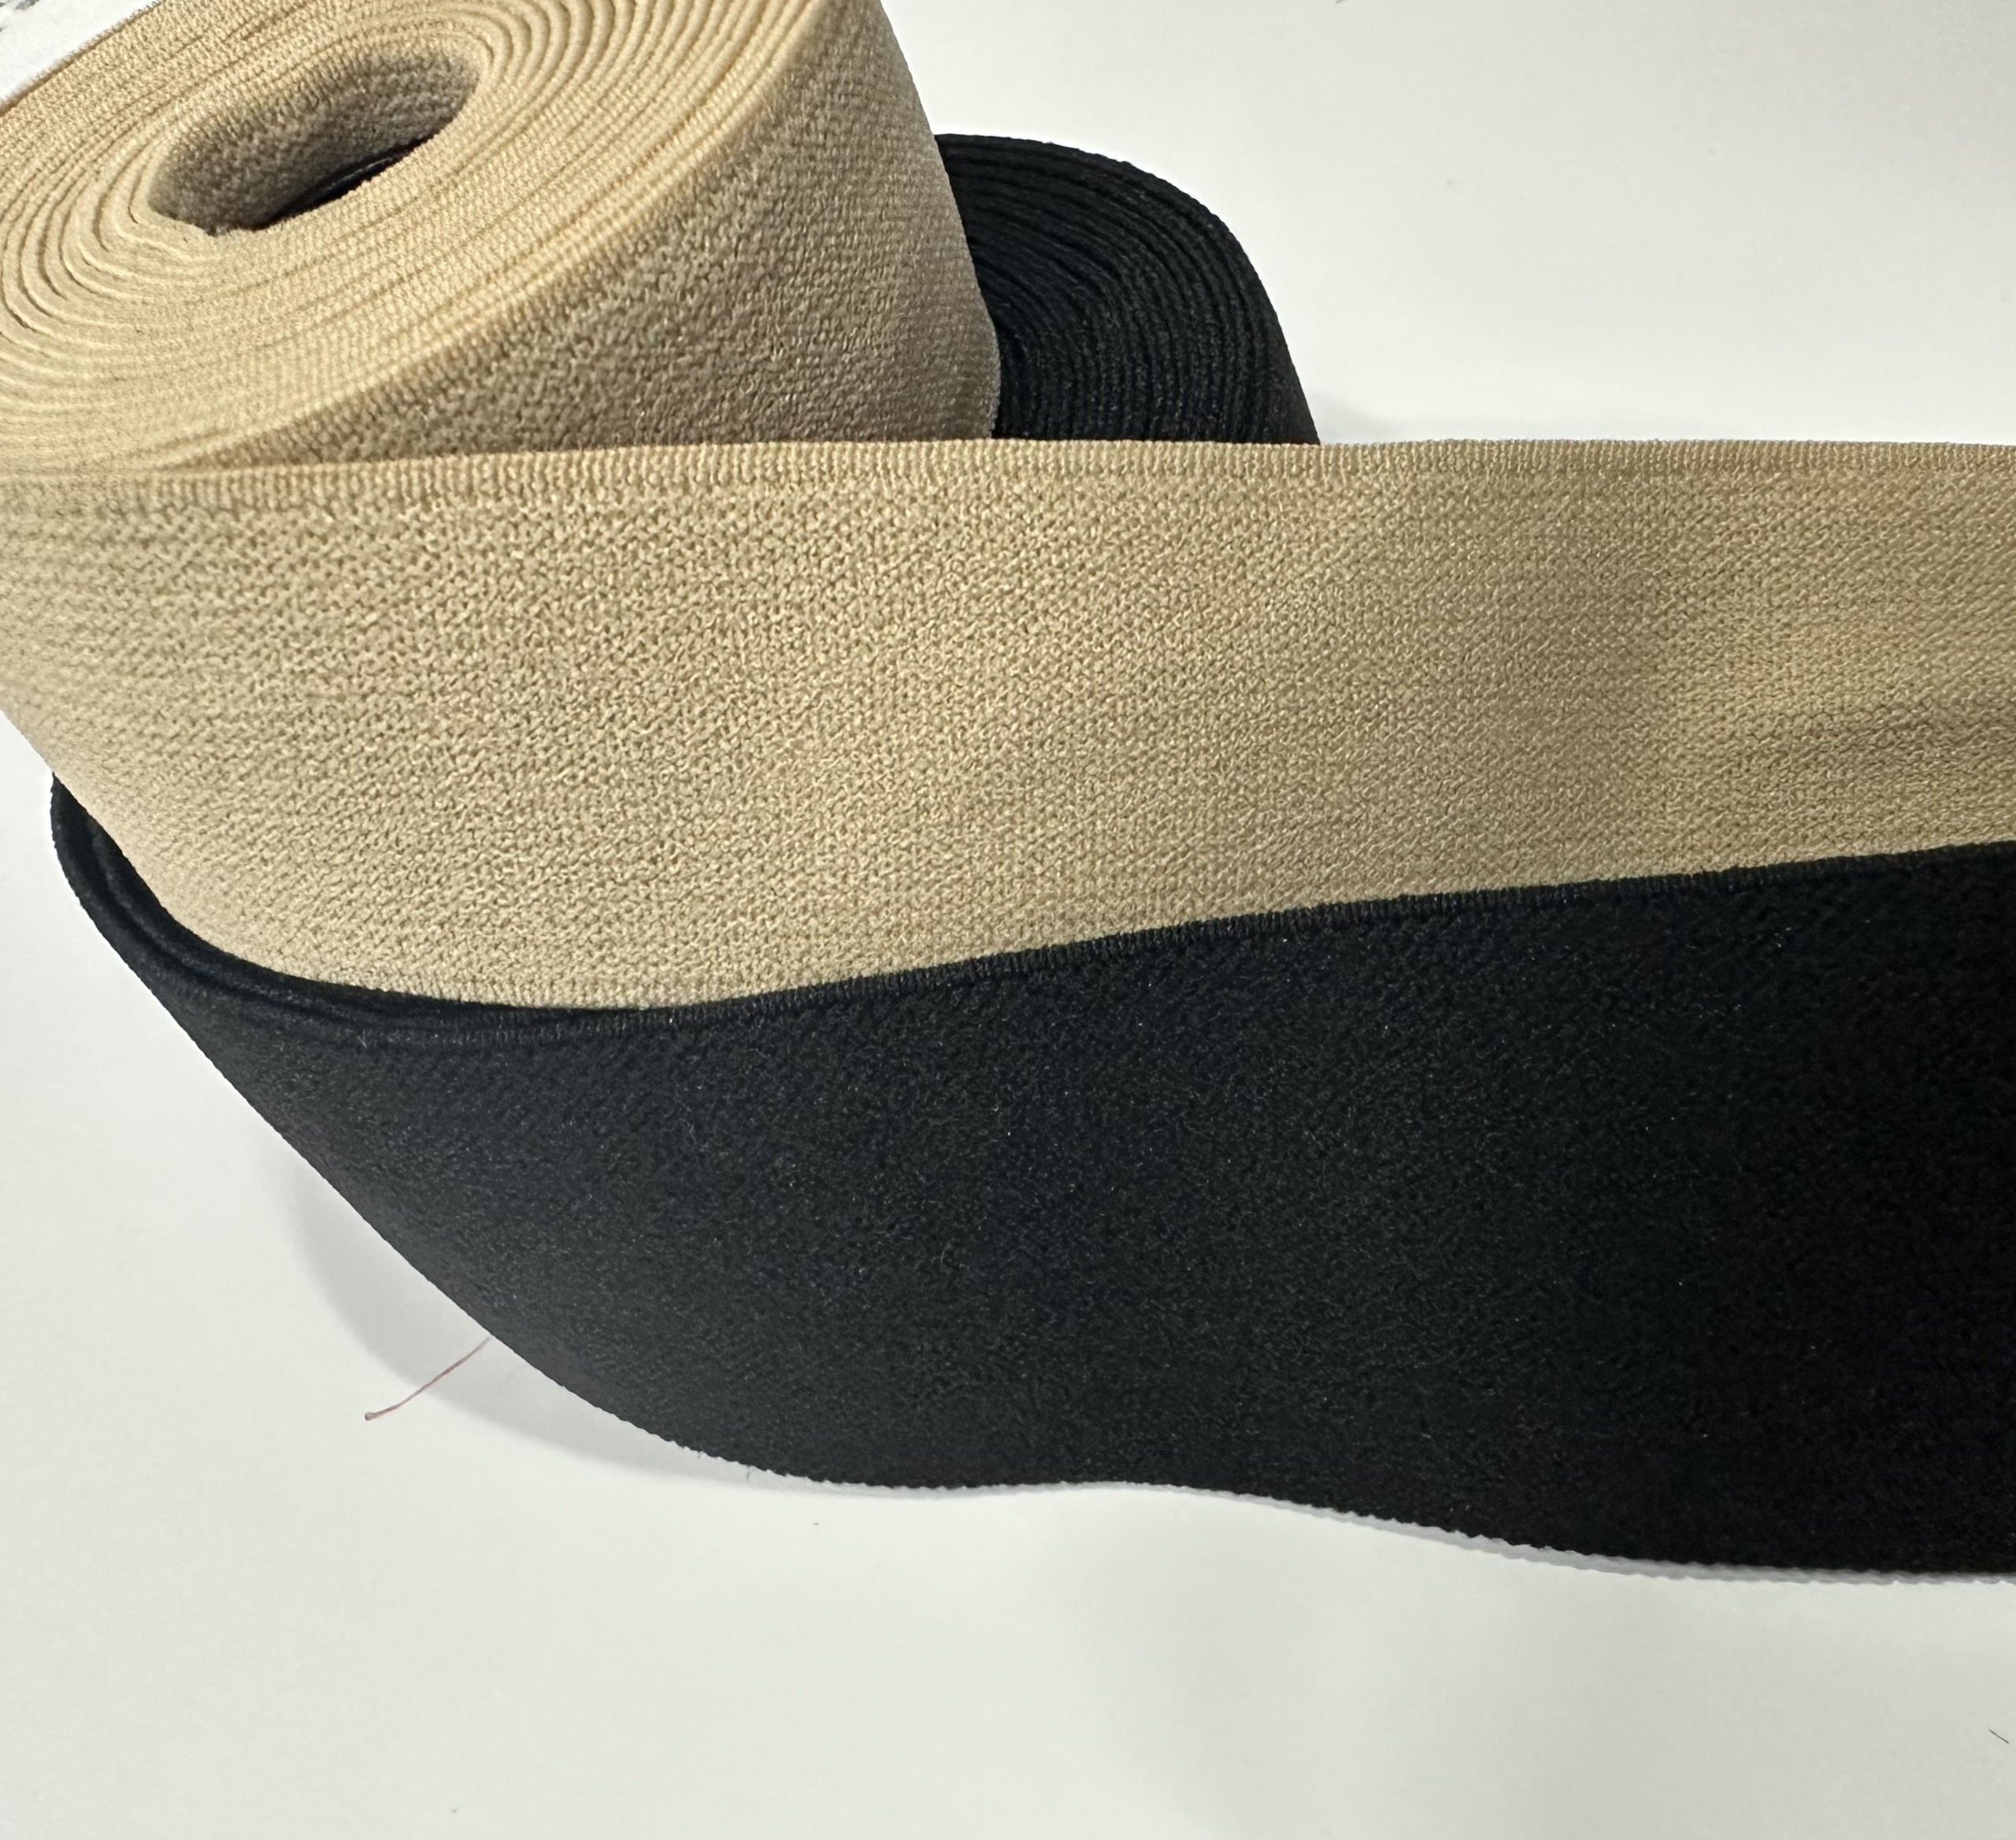 Dây thun 2 mặt - Two side elastic band